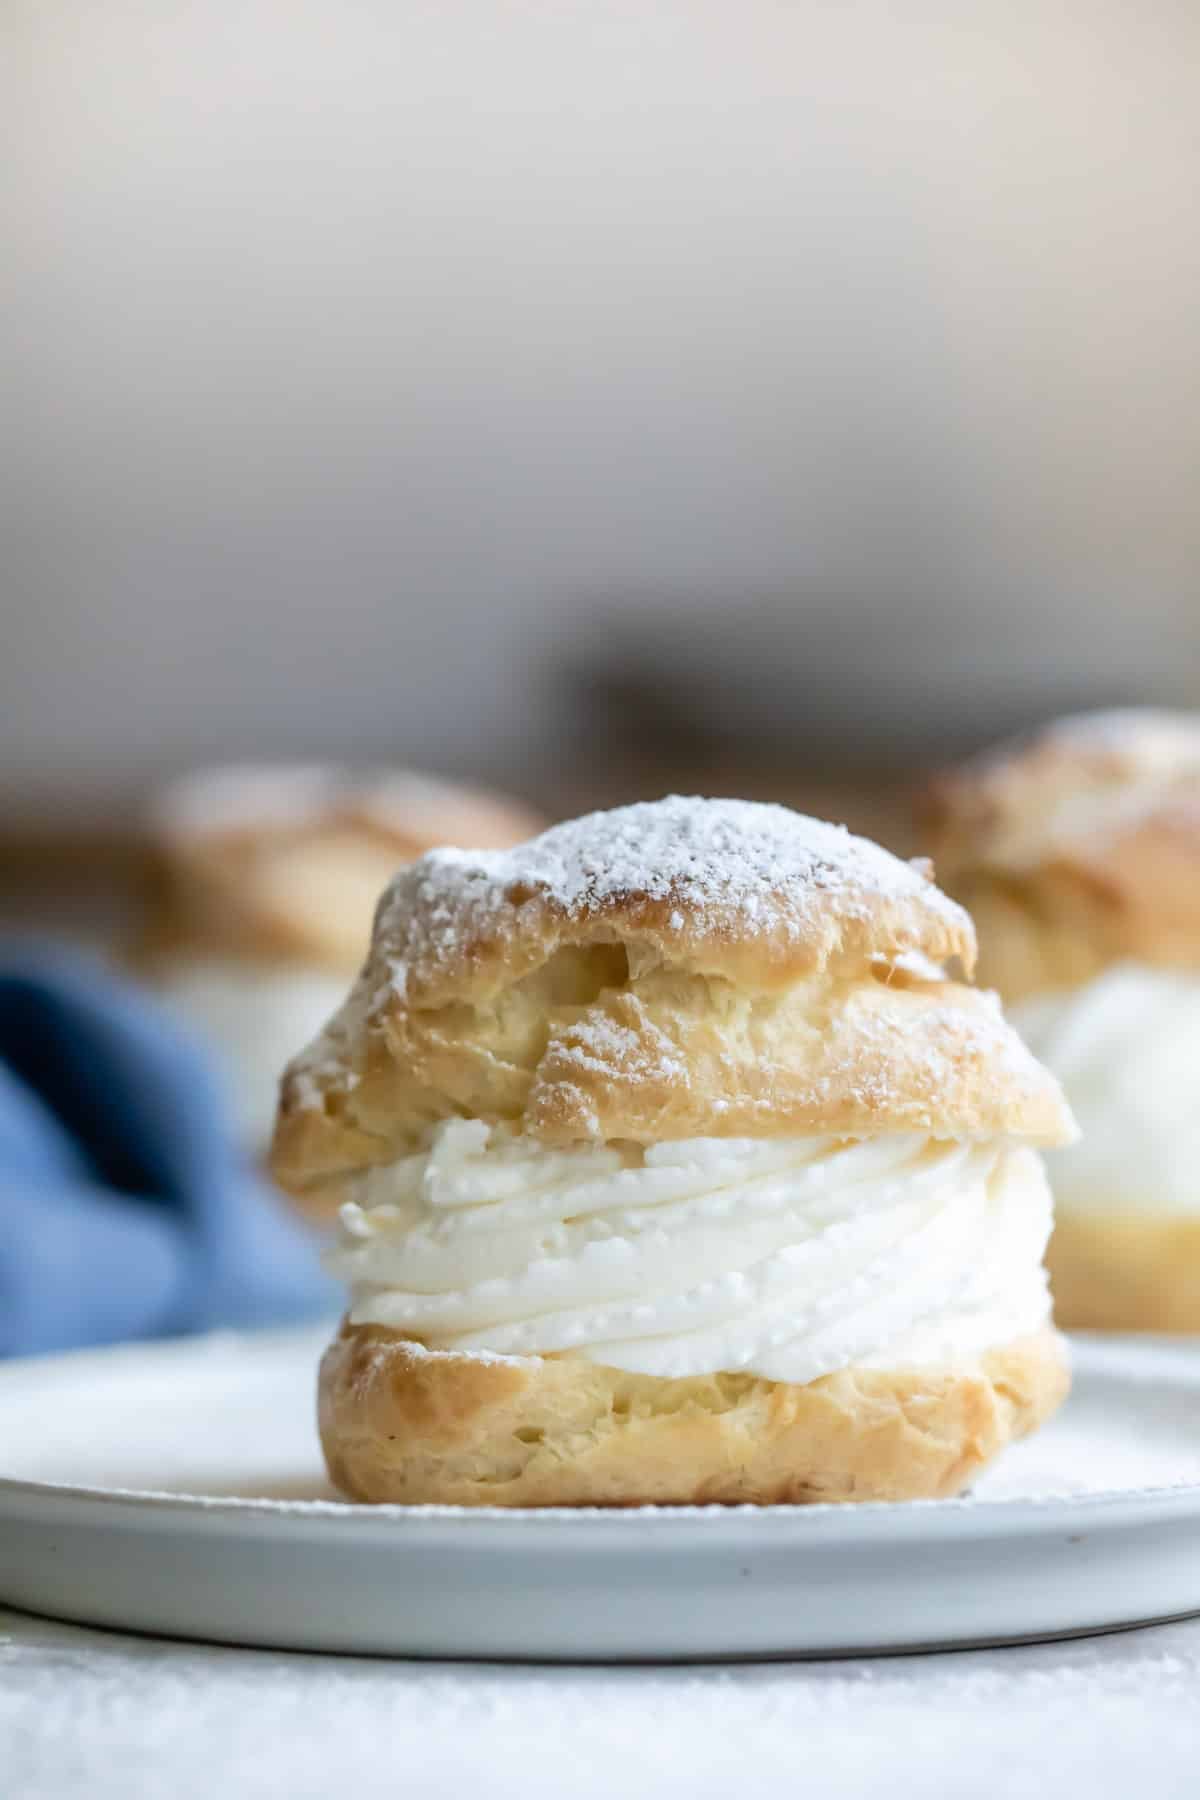 Dusting filled cream puffs with powdered sugar.